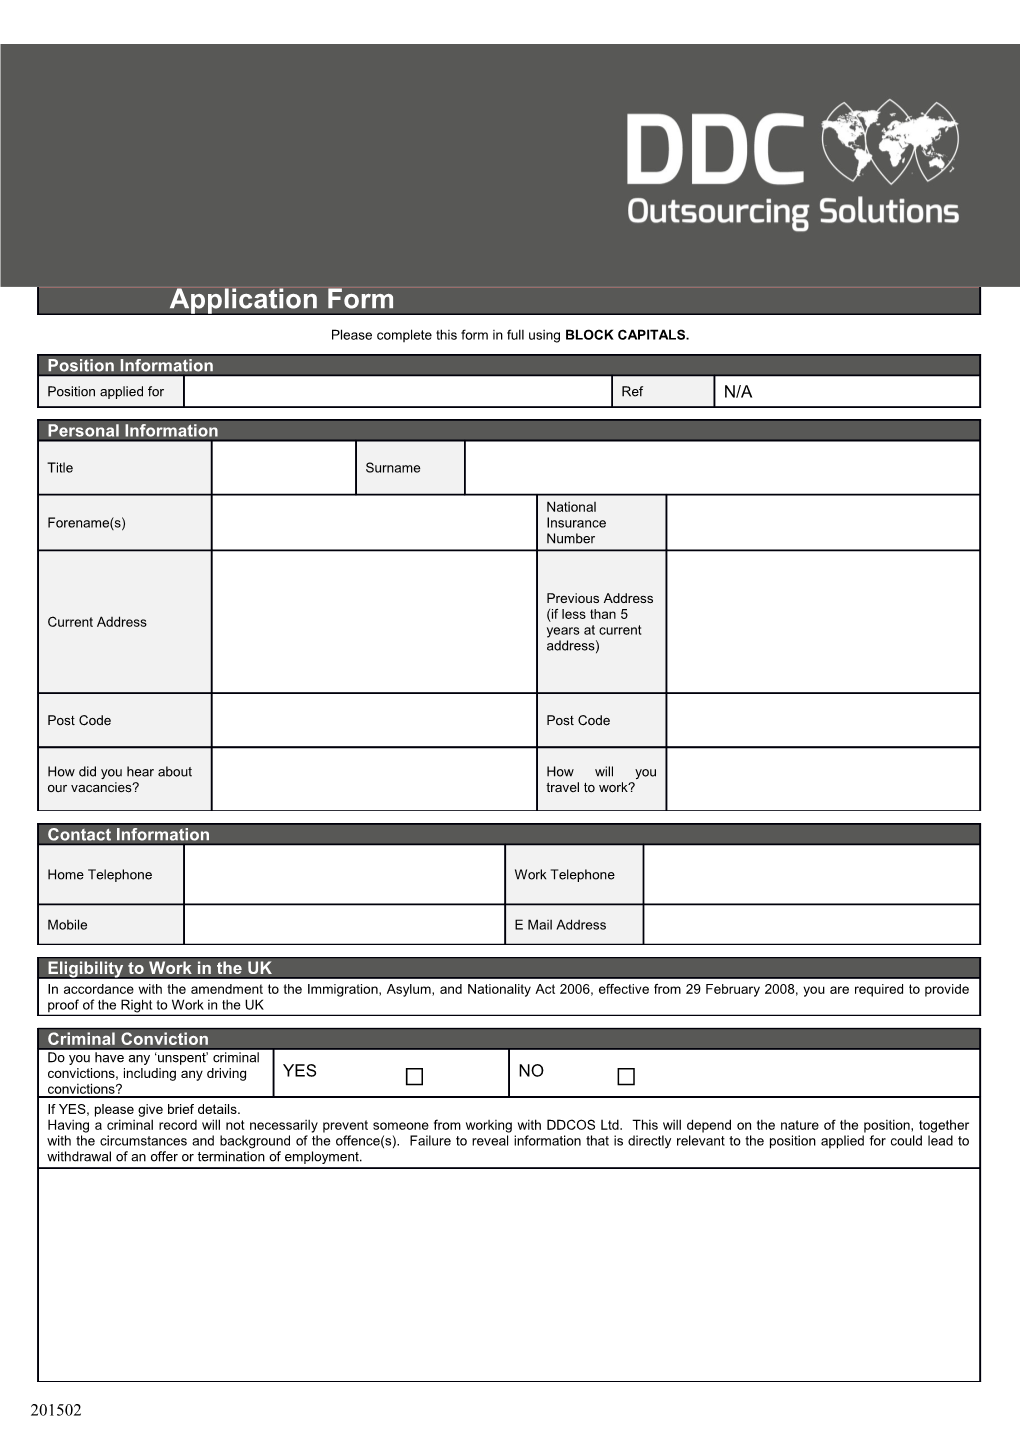 Please Complete This Form in Full Using BLOCK CAPITALS